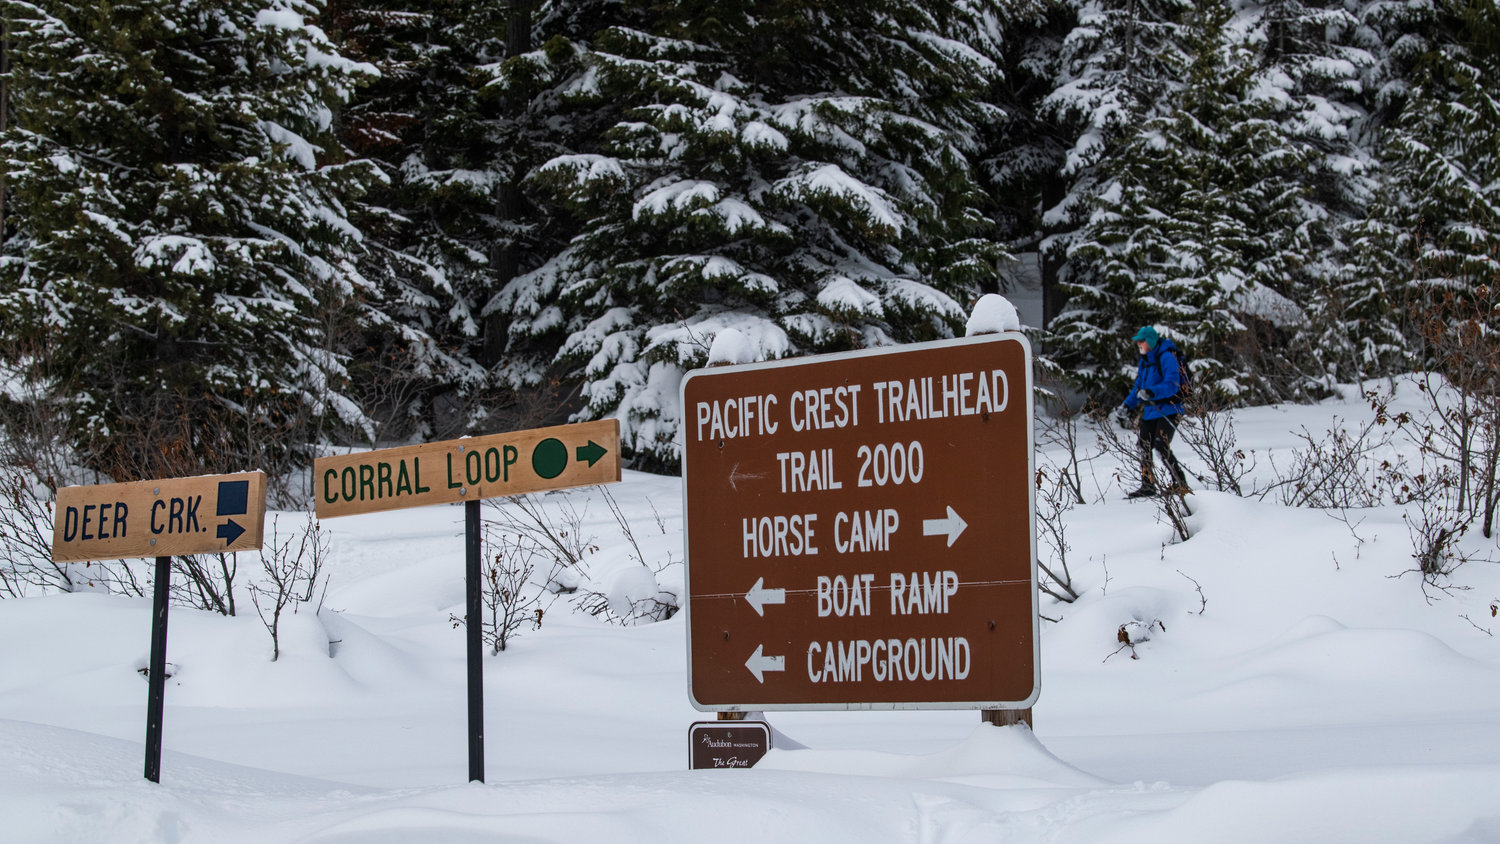 Dennis Pennell, a member of the Olympia Mountaineers, skis past a sign for the Pacific Crest Trail on Sunday at the White Pass Ski Area’s Nordic trails.